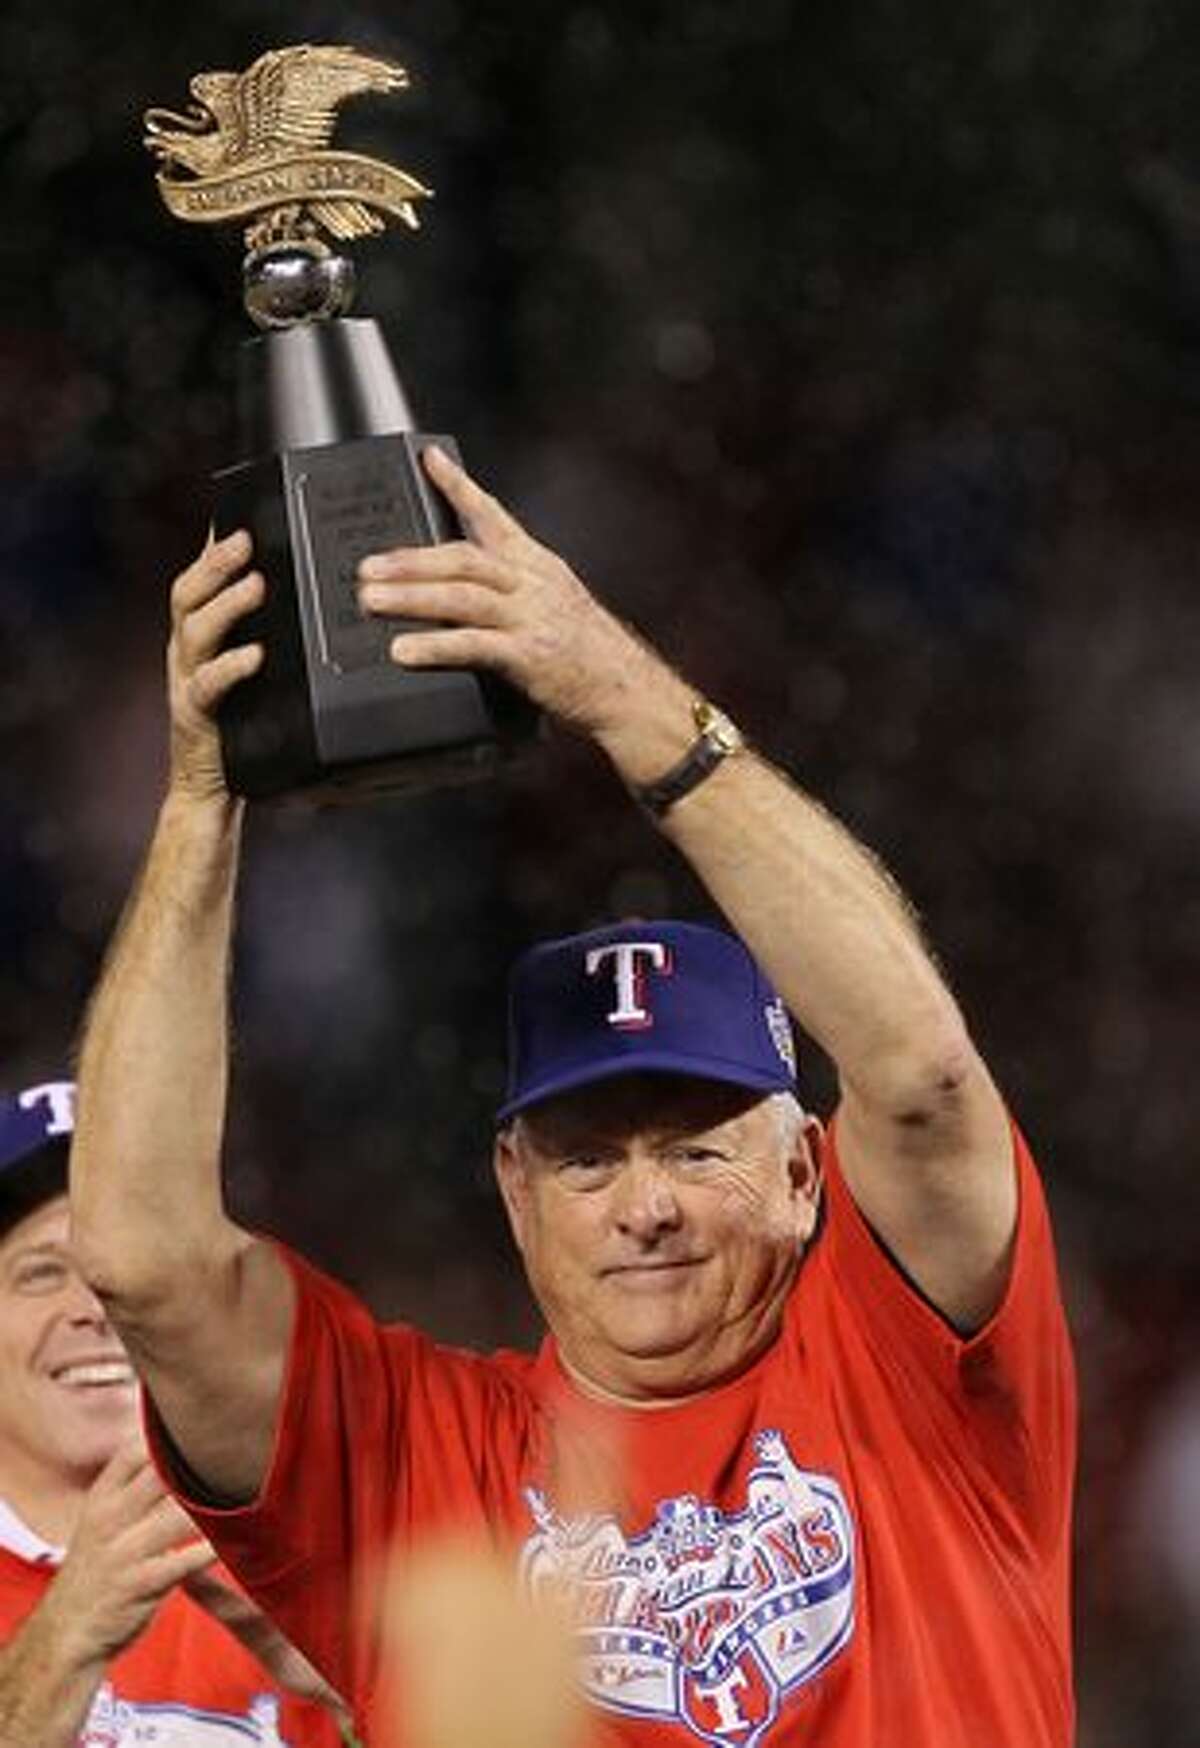 Team president Nolan Ryan of the Texas Rangers holds the Warren C. Giles Trophy after defeating the New York Yankees in Game Six of the ALCS to advance to the World Series during the 2010 MLB Playoffs at Rangers Ballpark in Arlington on Friday in Arlington, Texas.